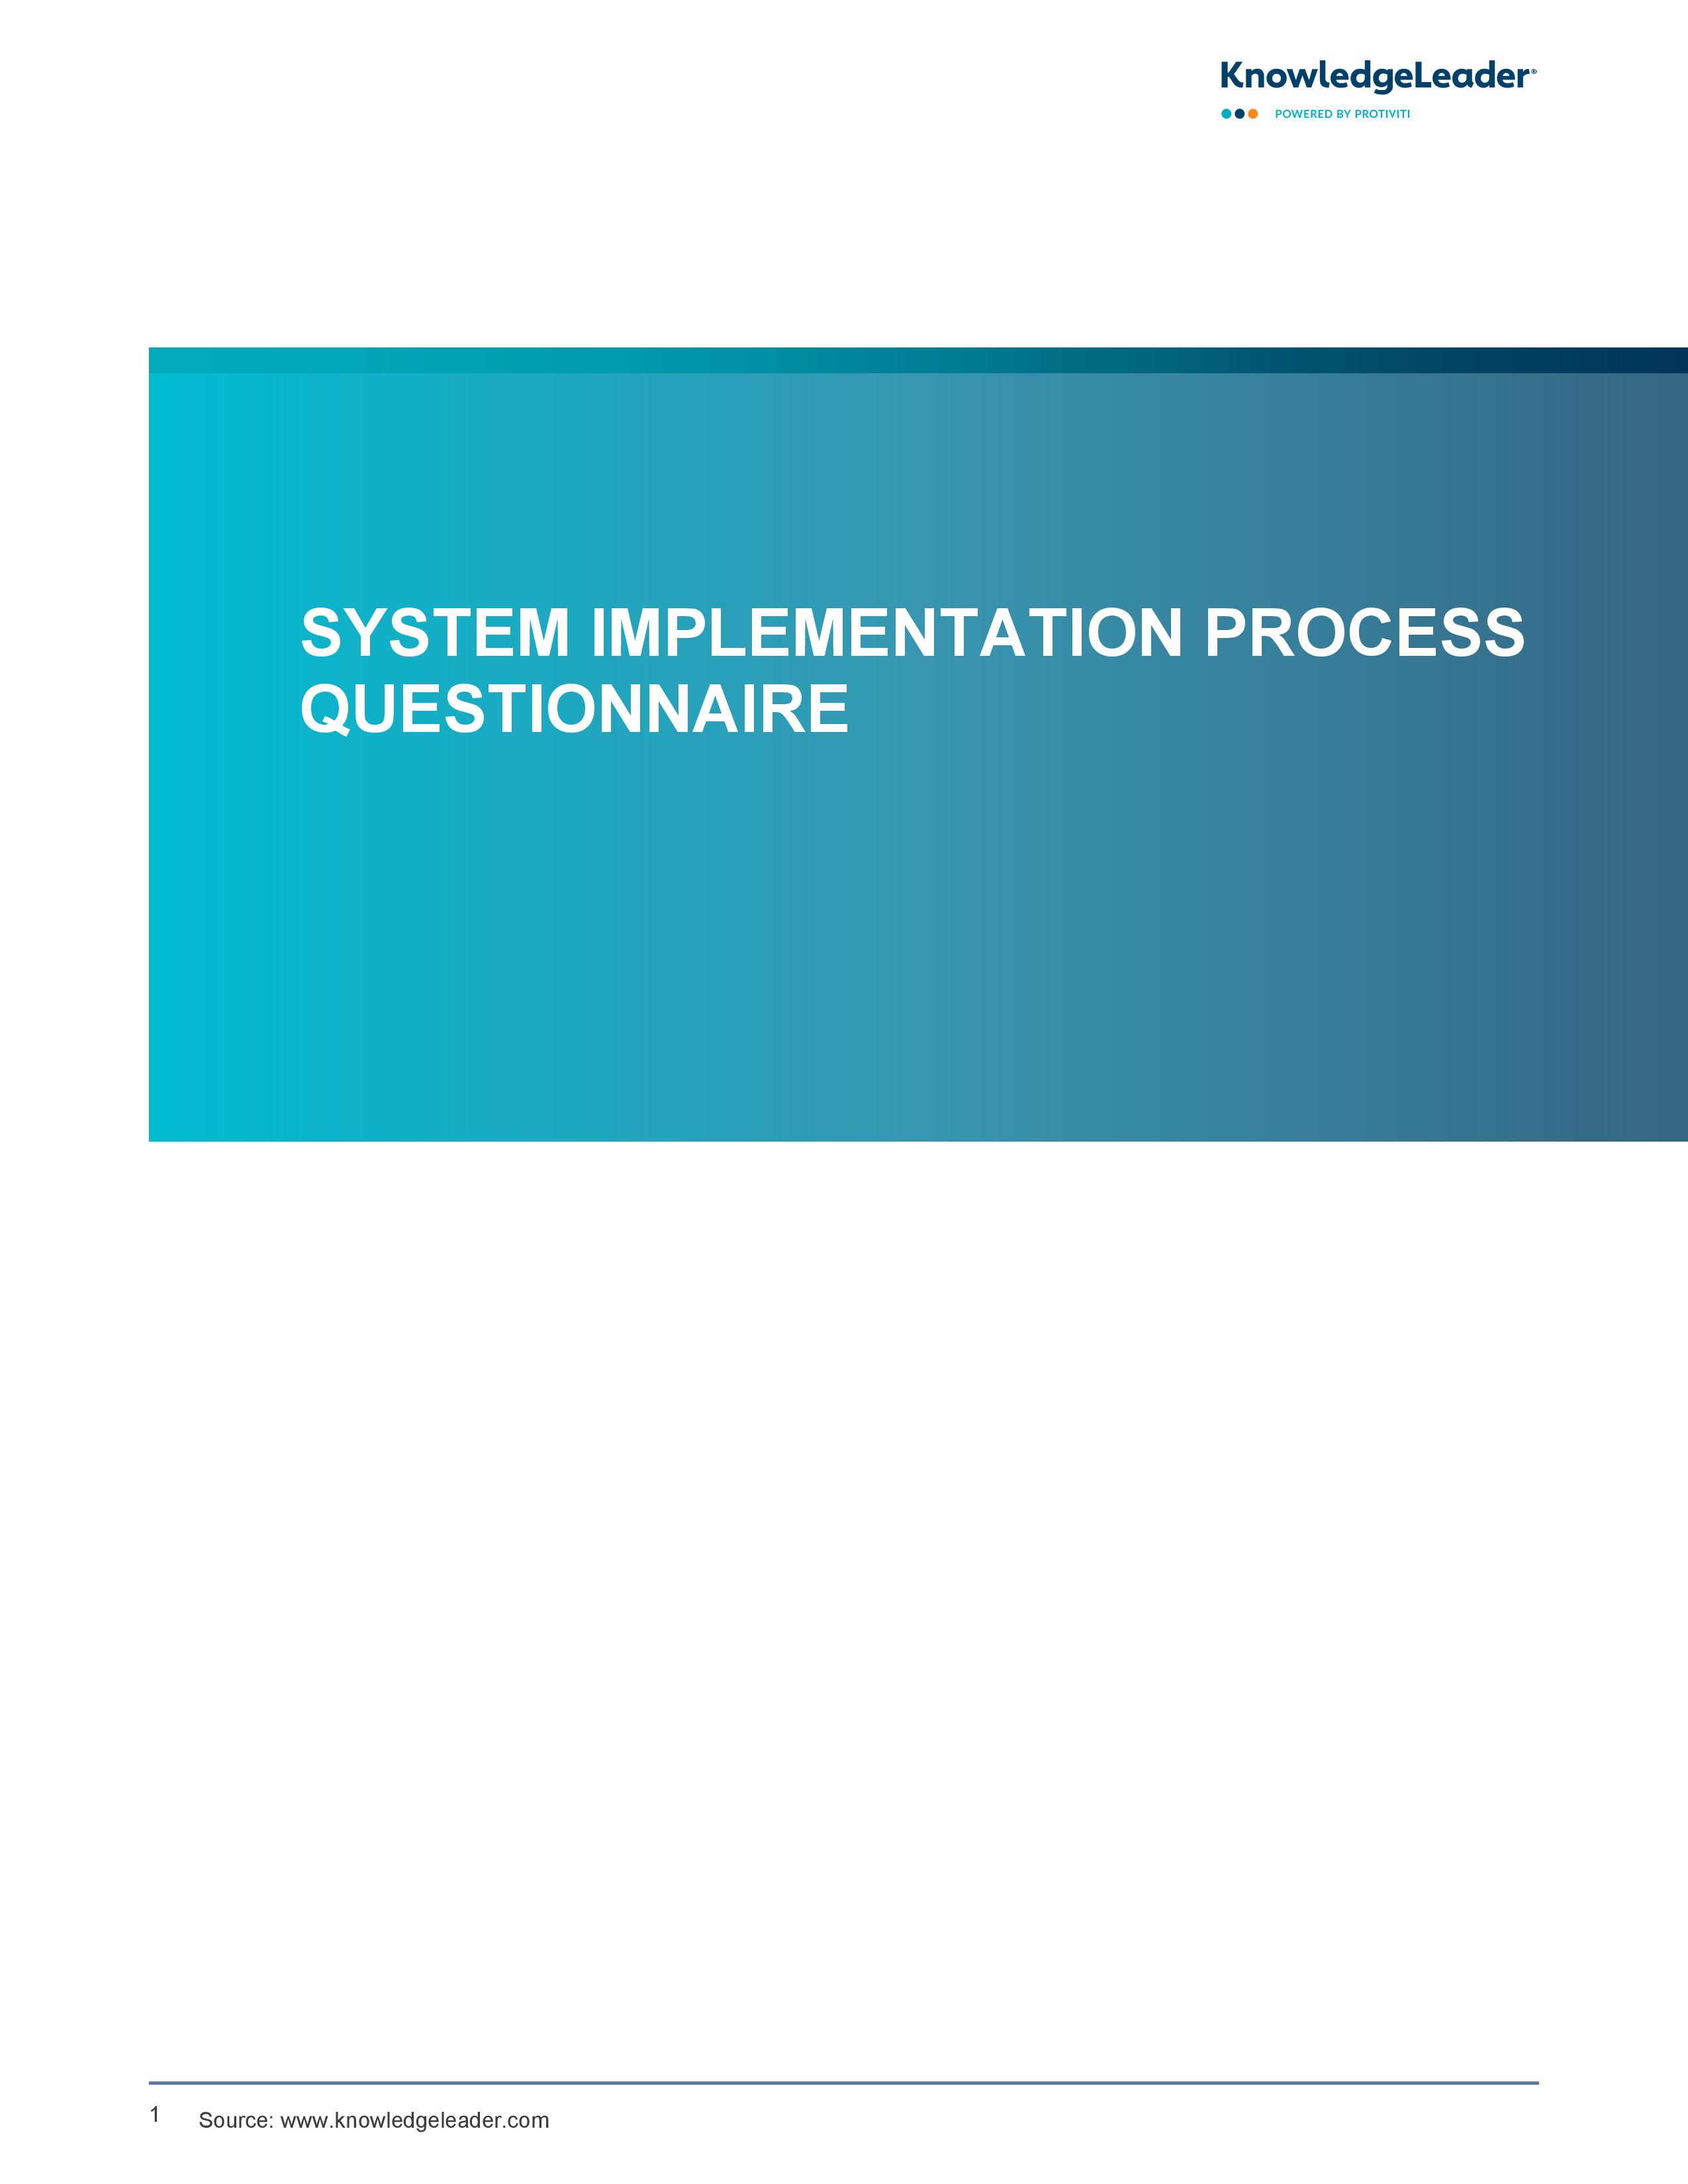 screenshot of the first page of System Implementation Process Questionnaire